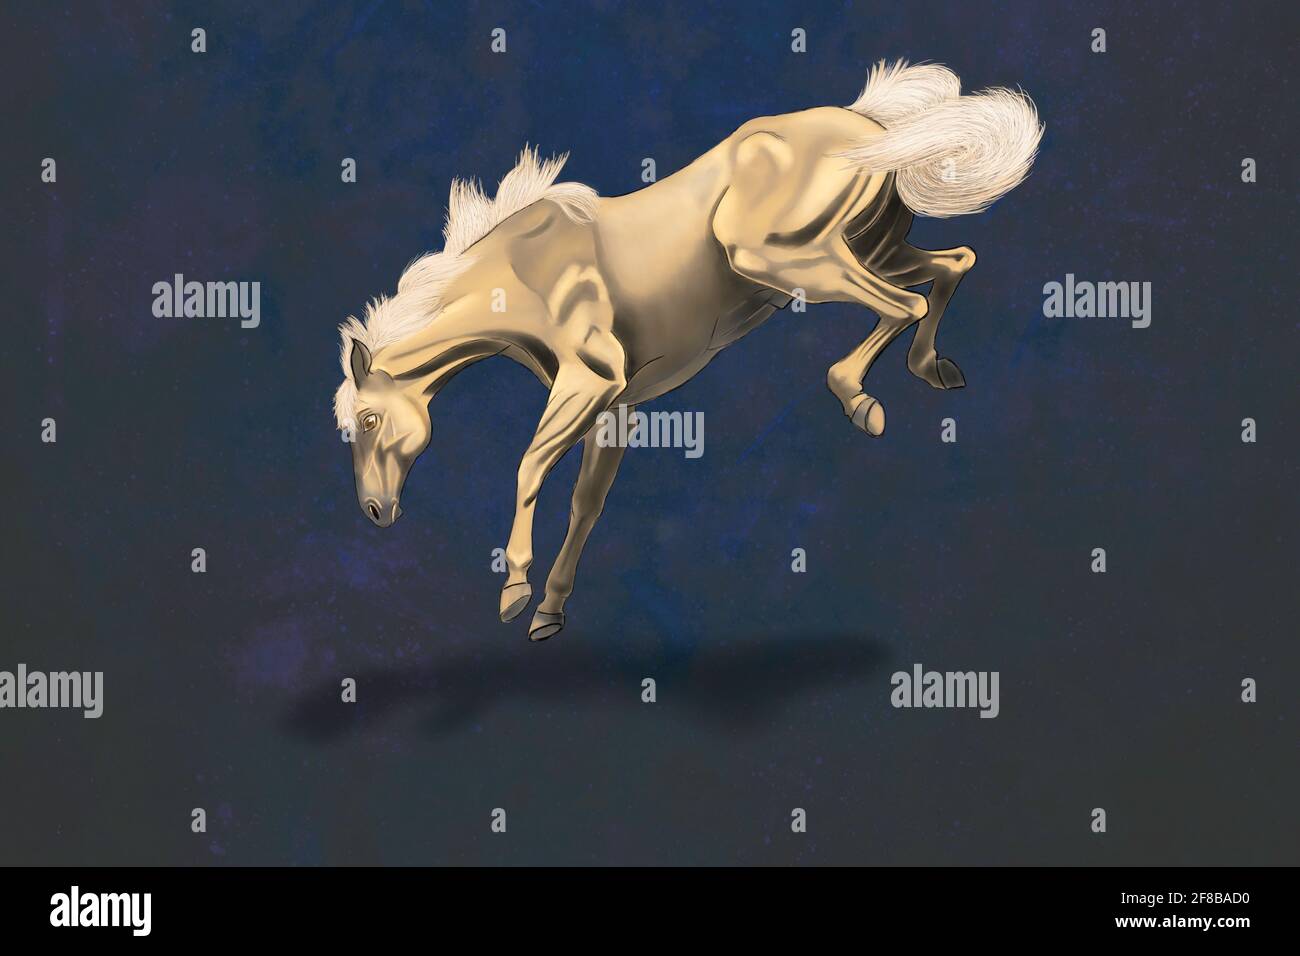 Digital illustration - a bucking Palomino Horse on a dark background. Palomino implies a gold coat and ight cream or white mane and tail. Stock Photo